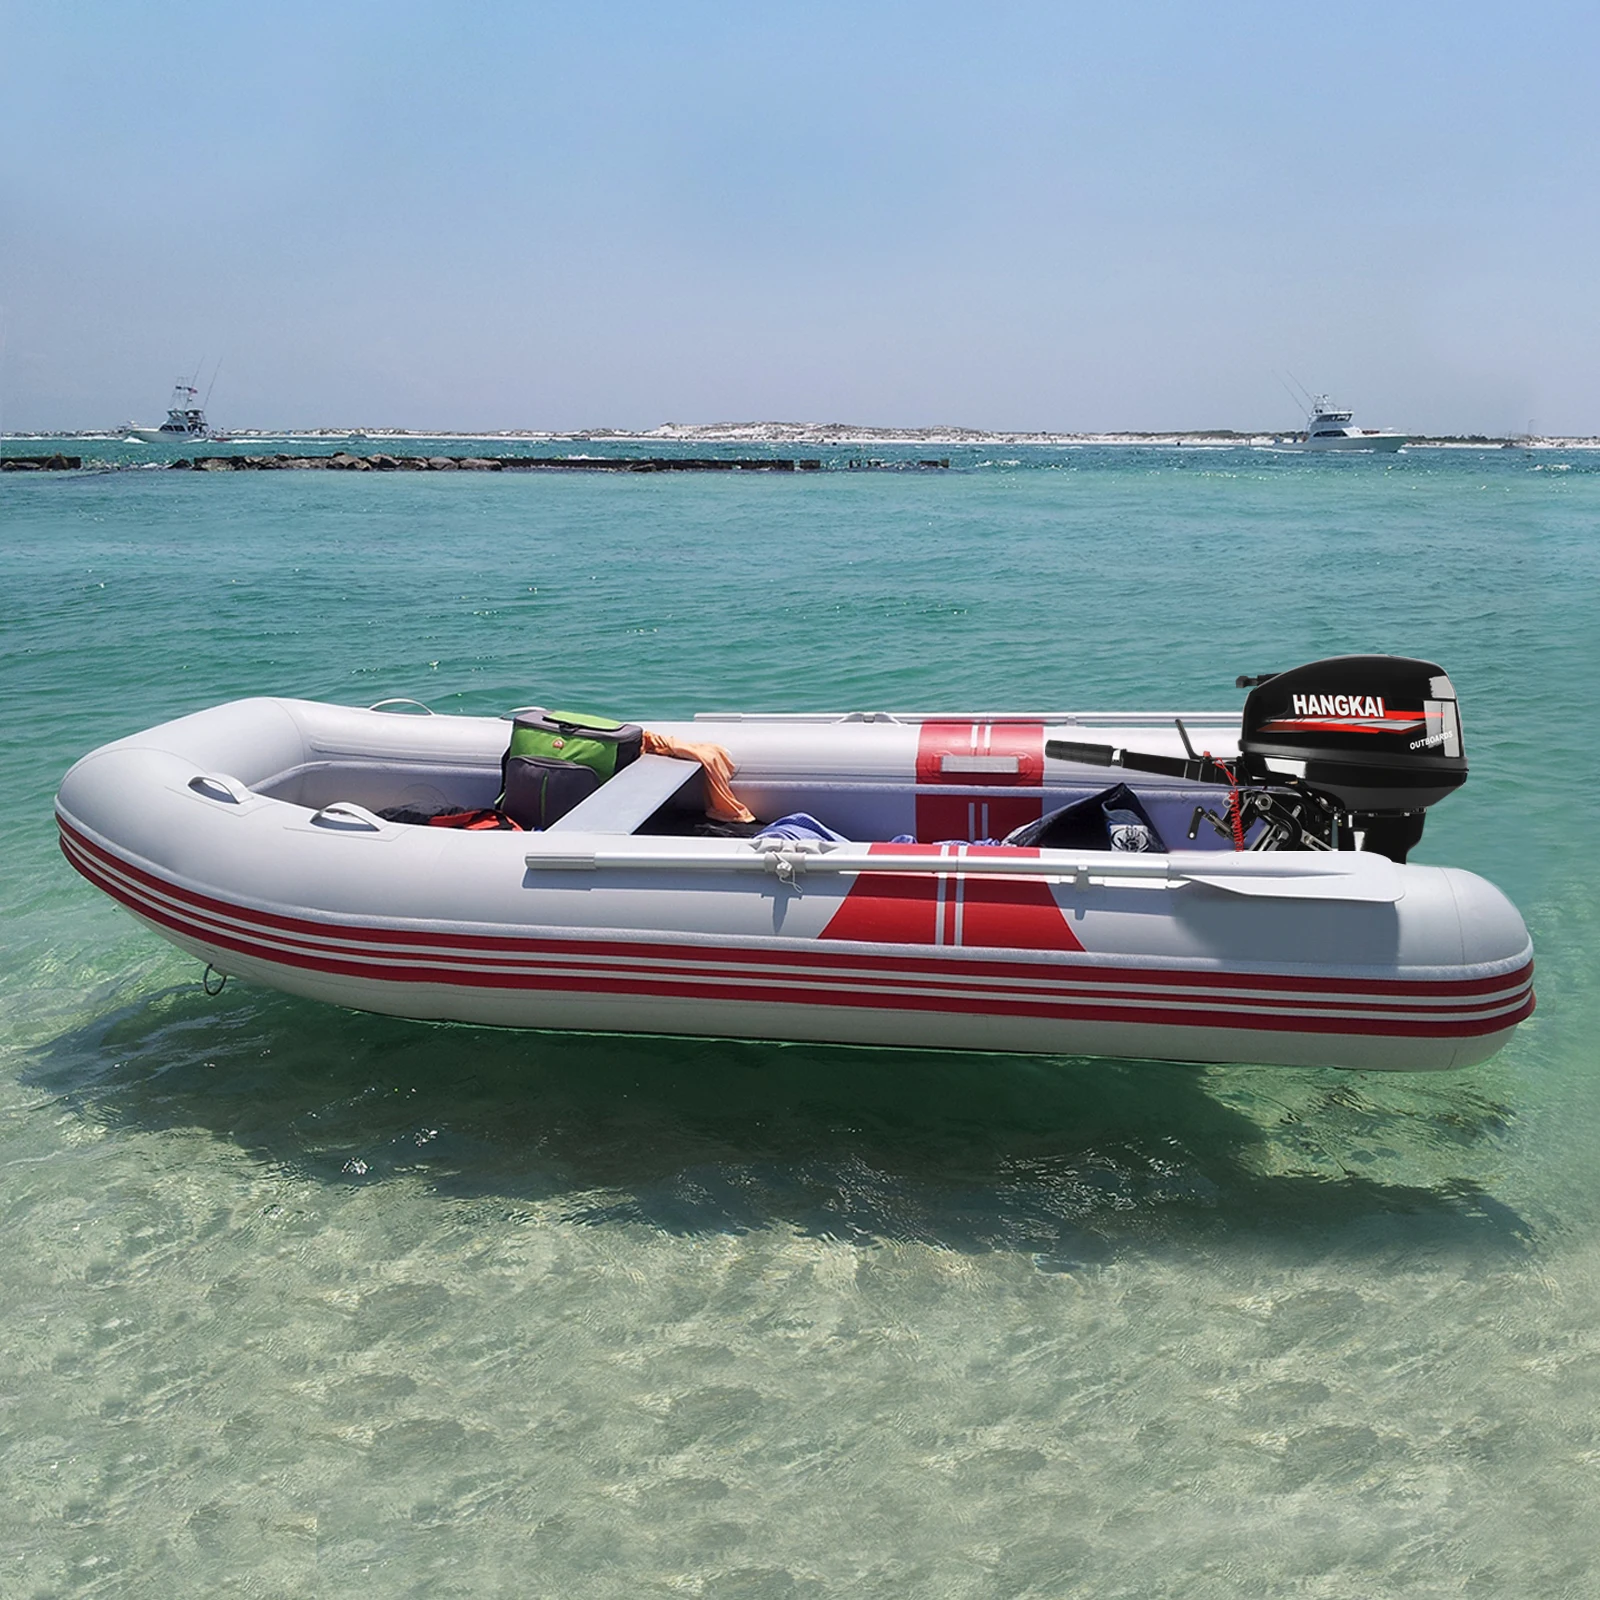 Hangkai 18 HP Boat Outboard Motor Long Shaft, 2 Strokes Inflatable Gasolina Boat Outboard Engine,Water Cooling System 2 strokes outboard motor and shipping world widely small boat diesel engine